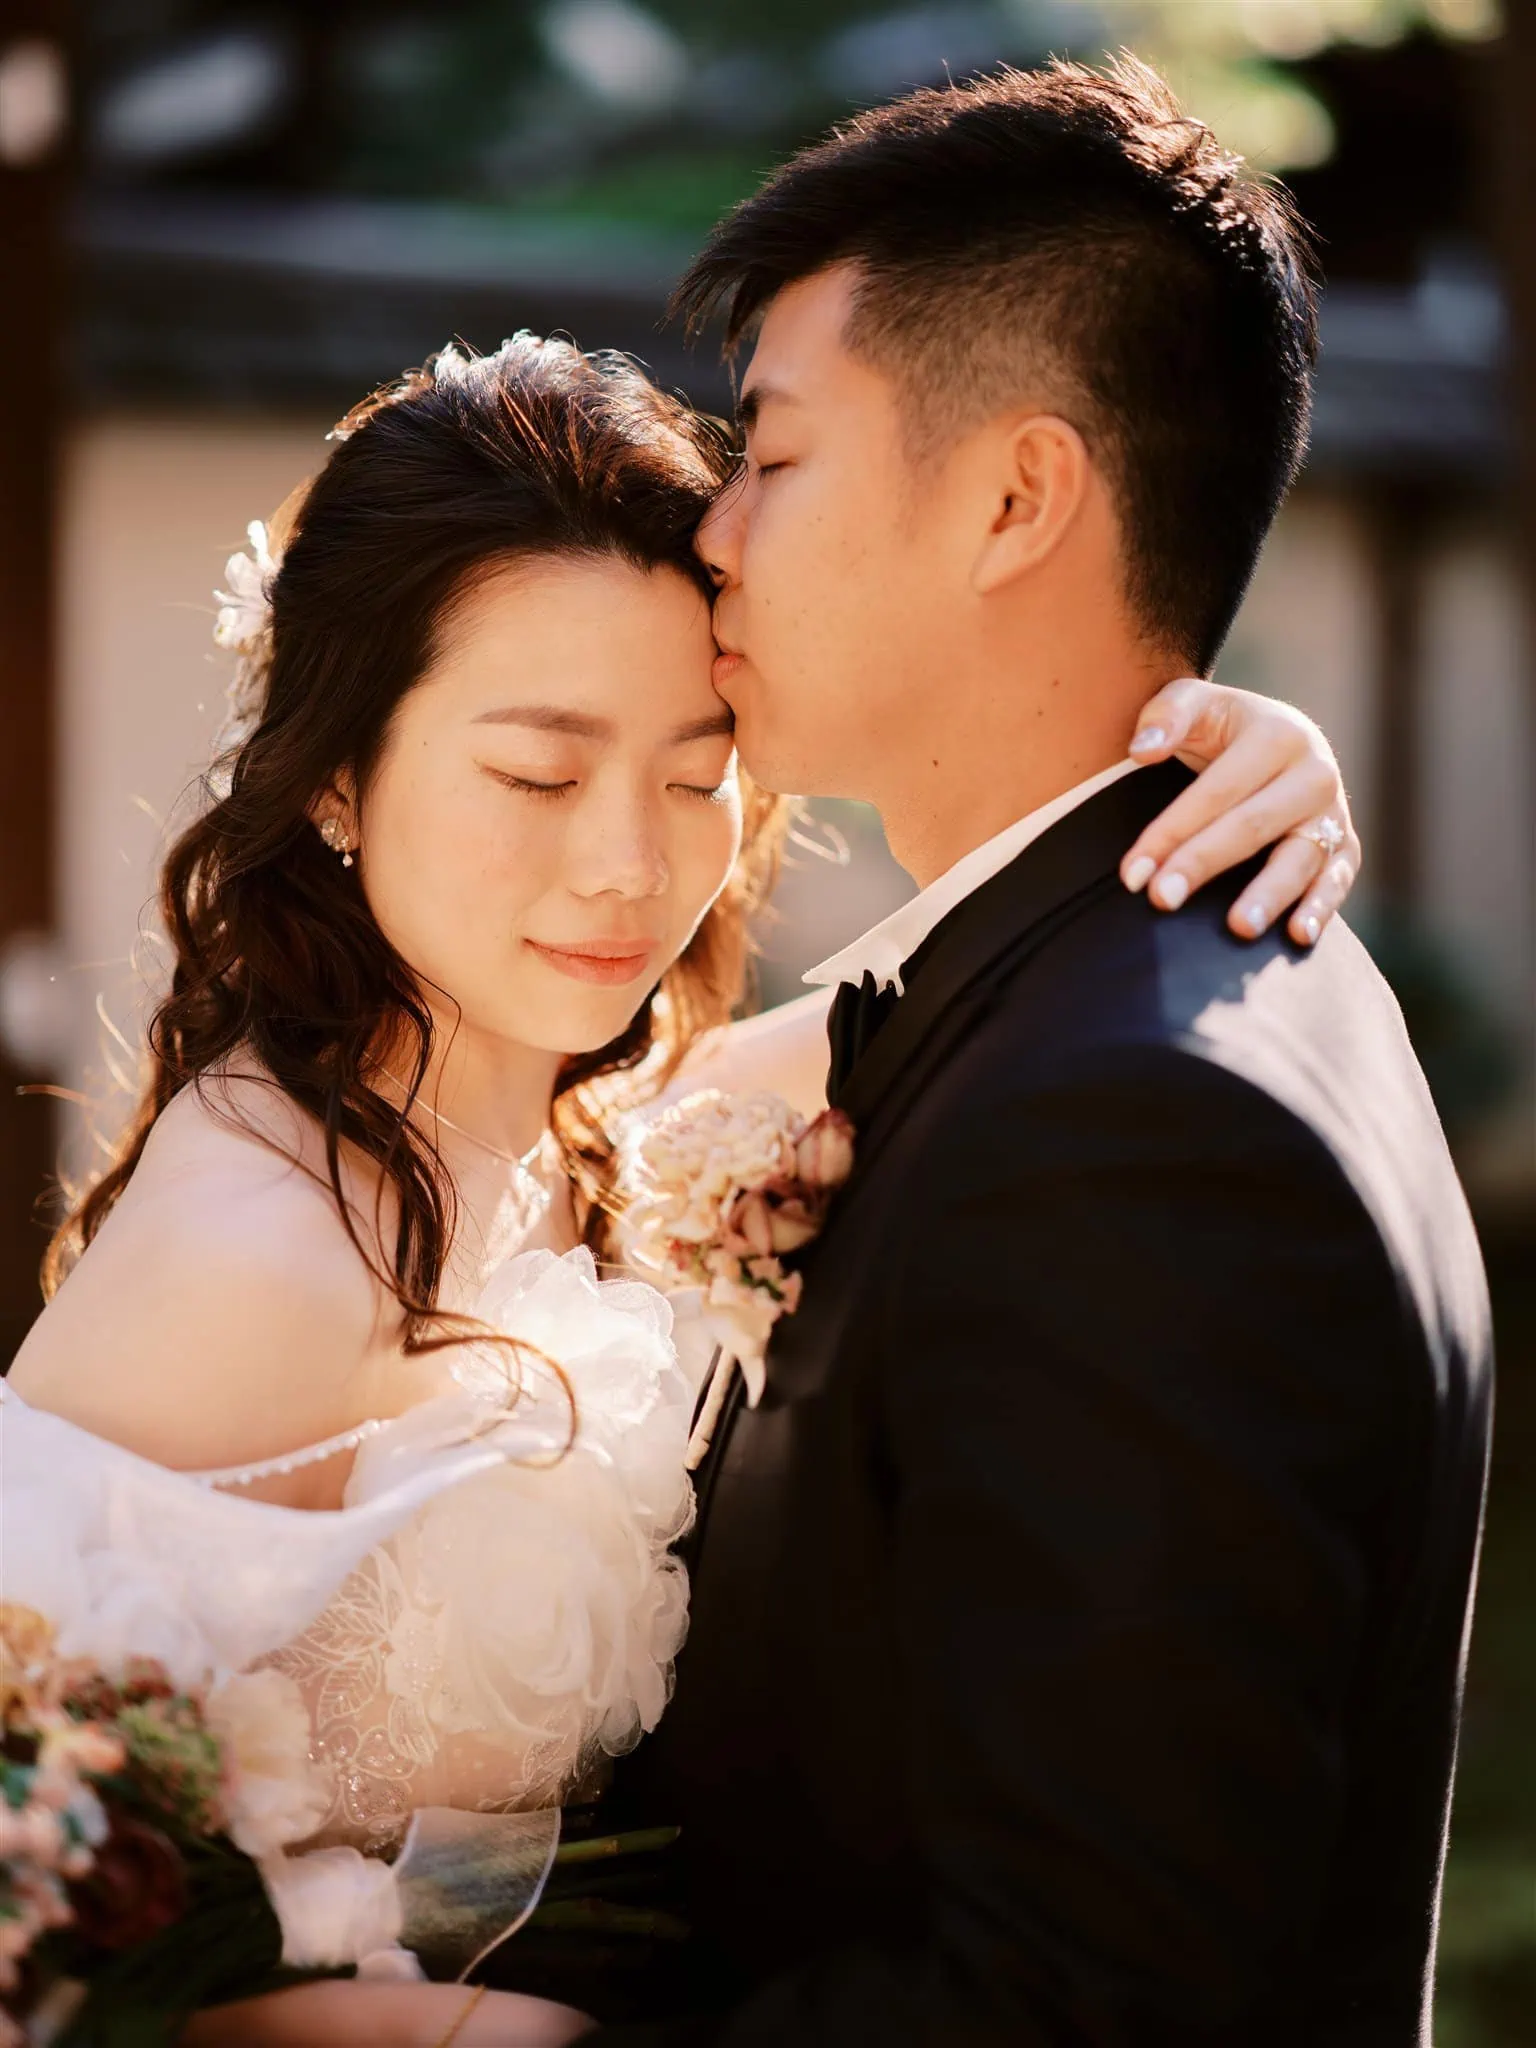 Kyoto Tokyo Japan Elopement Wedding Photographer, Planner & Videographer | An enchanting Japan elopement photographer captures a deeply intimate moment as a radiant bride and groom embrace in front of a majestic tree.